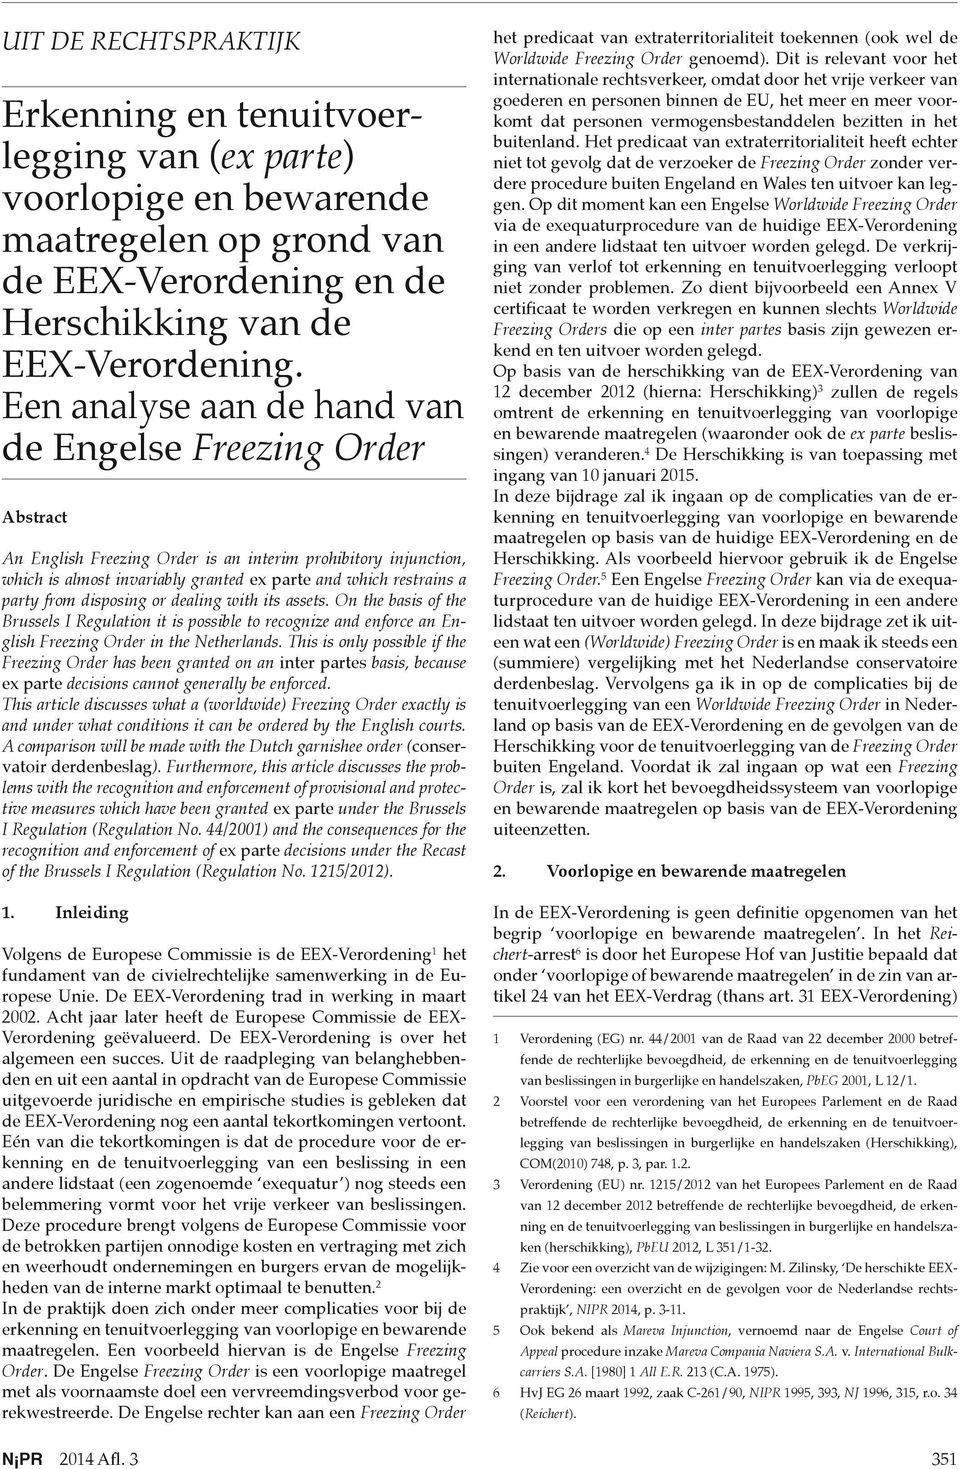 from disposing or dealing with its assets. On the basis of the Brussels I Regulation it is possible to recognize and enforce an English Freezing Order in the Netherlands.